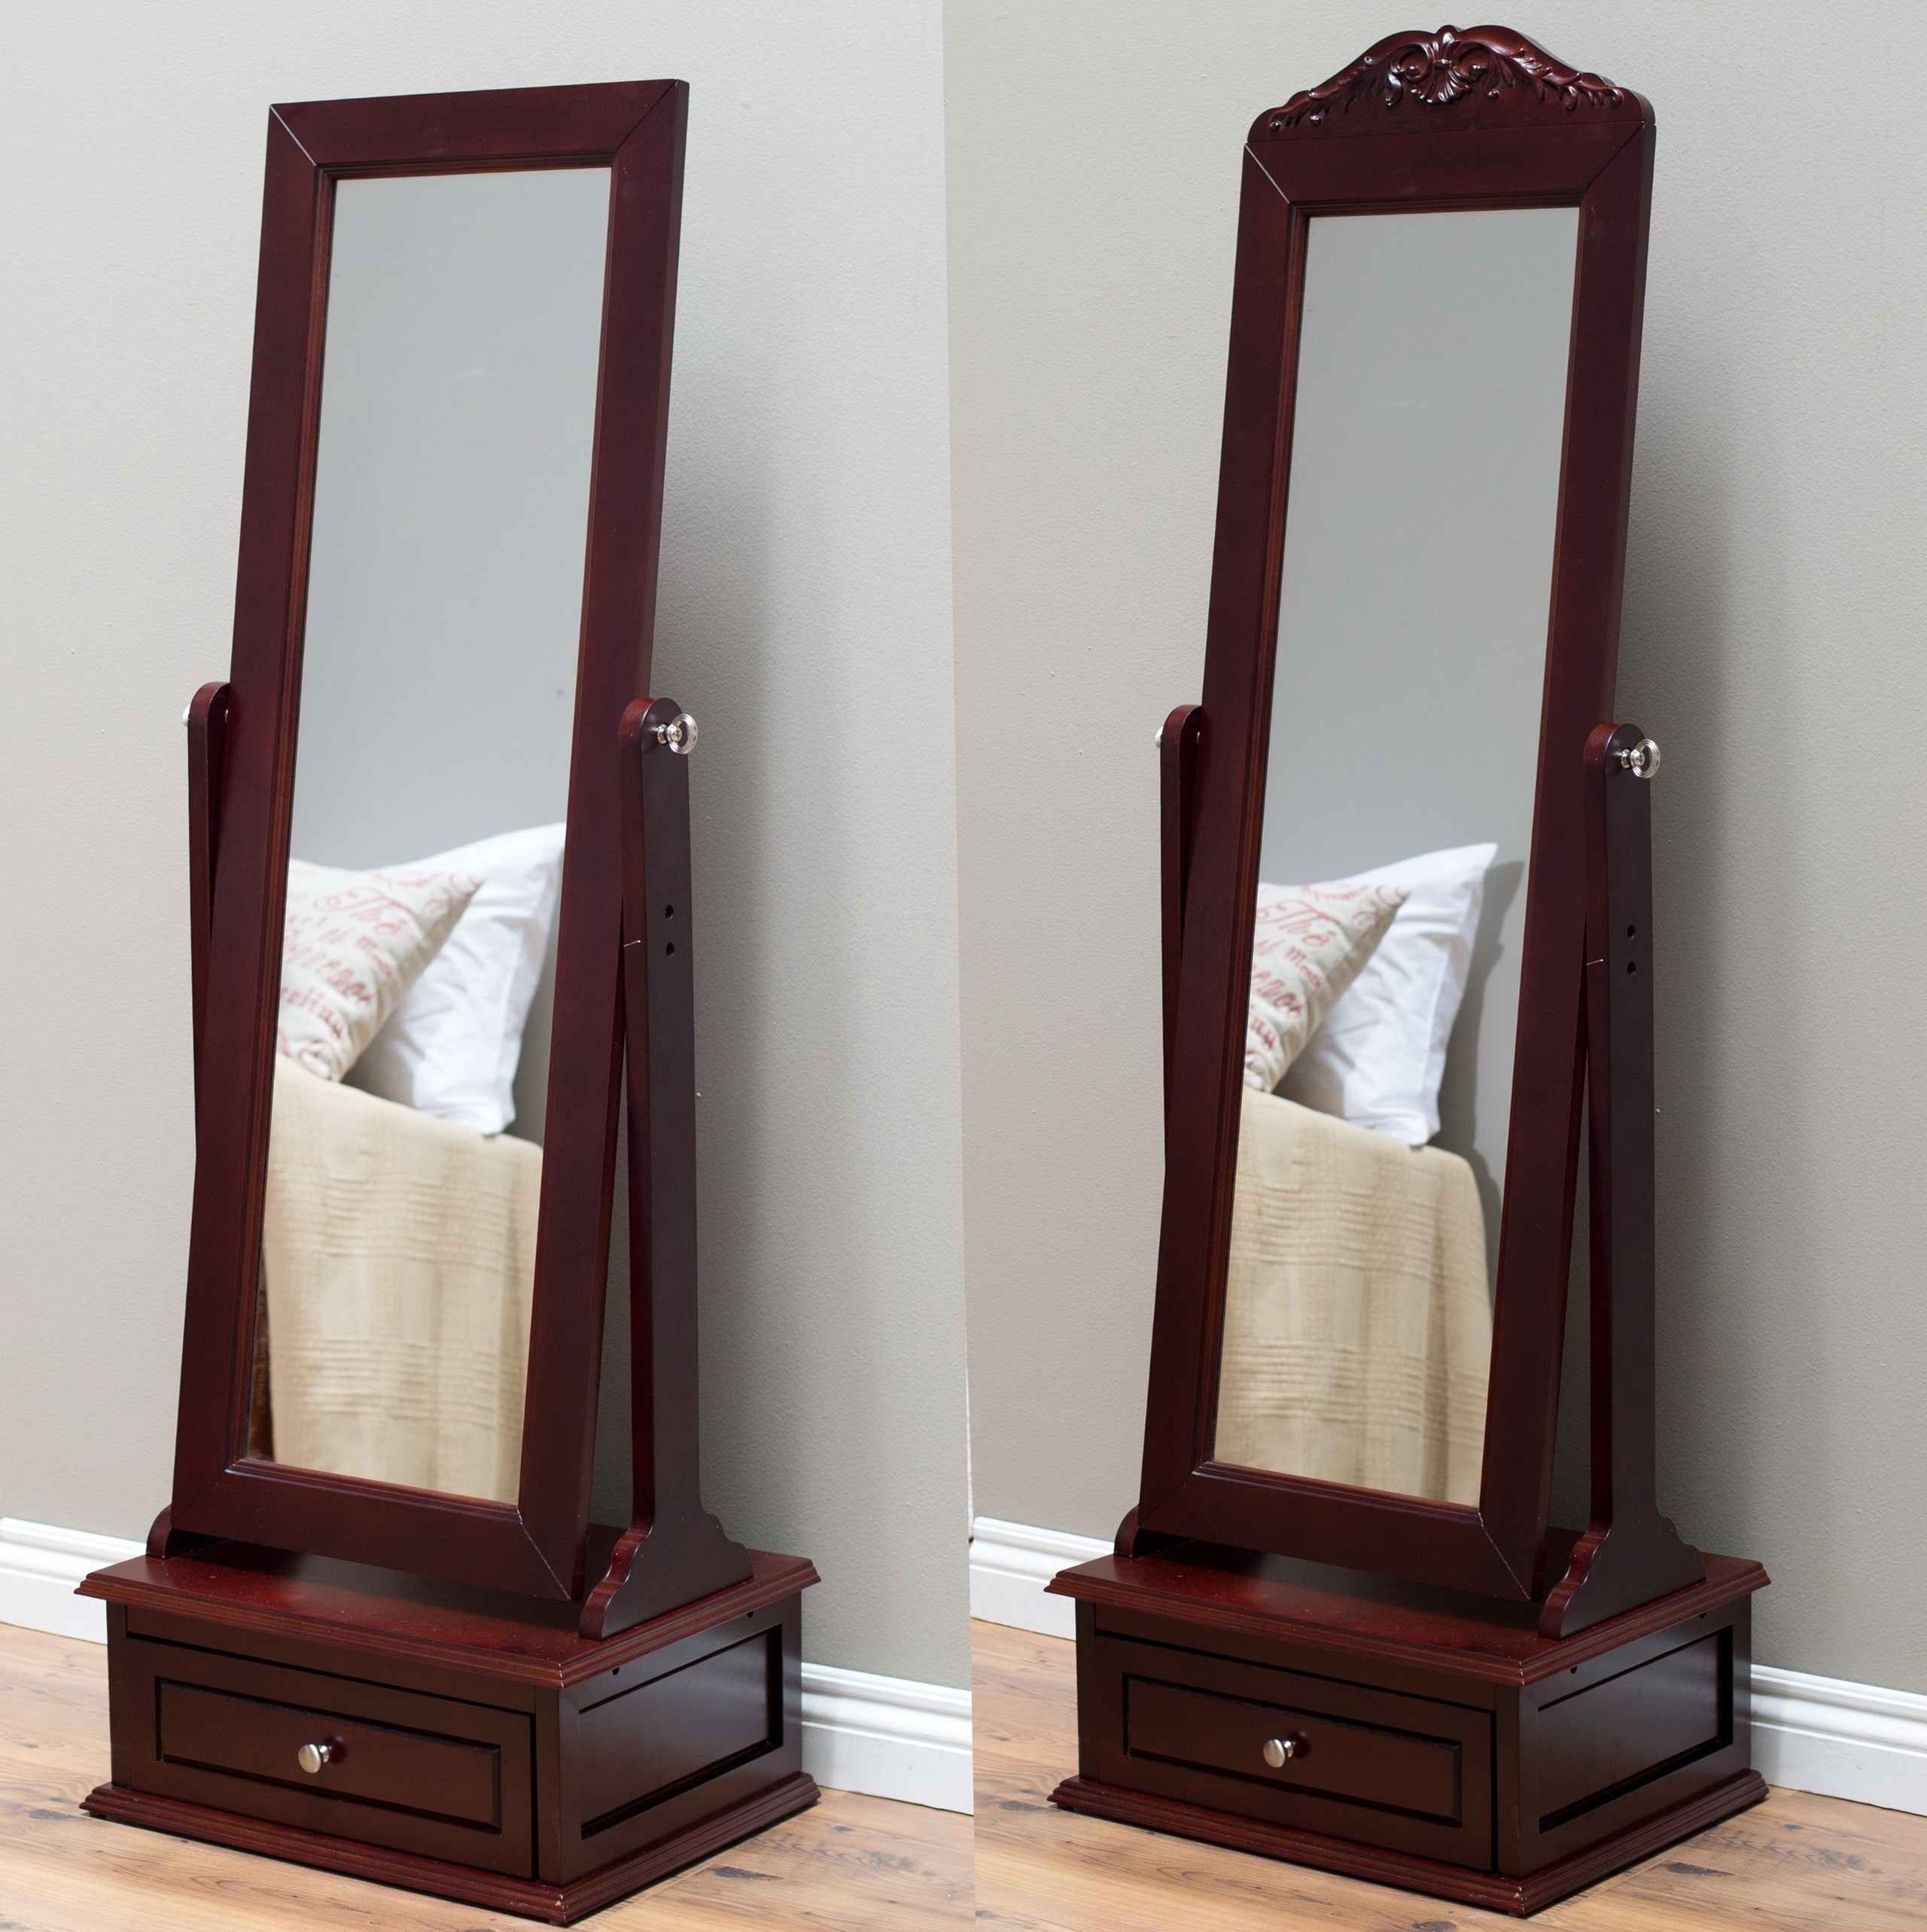 Floor standing mirror with drawer home design ideas